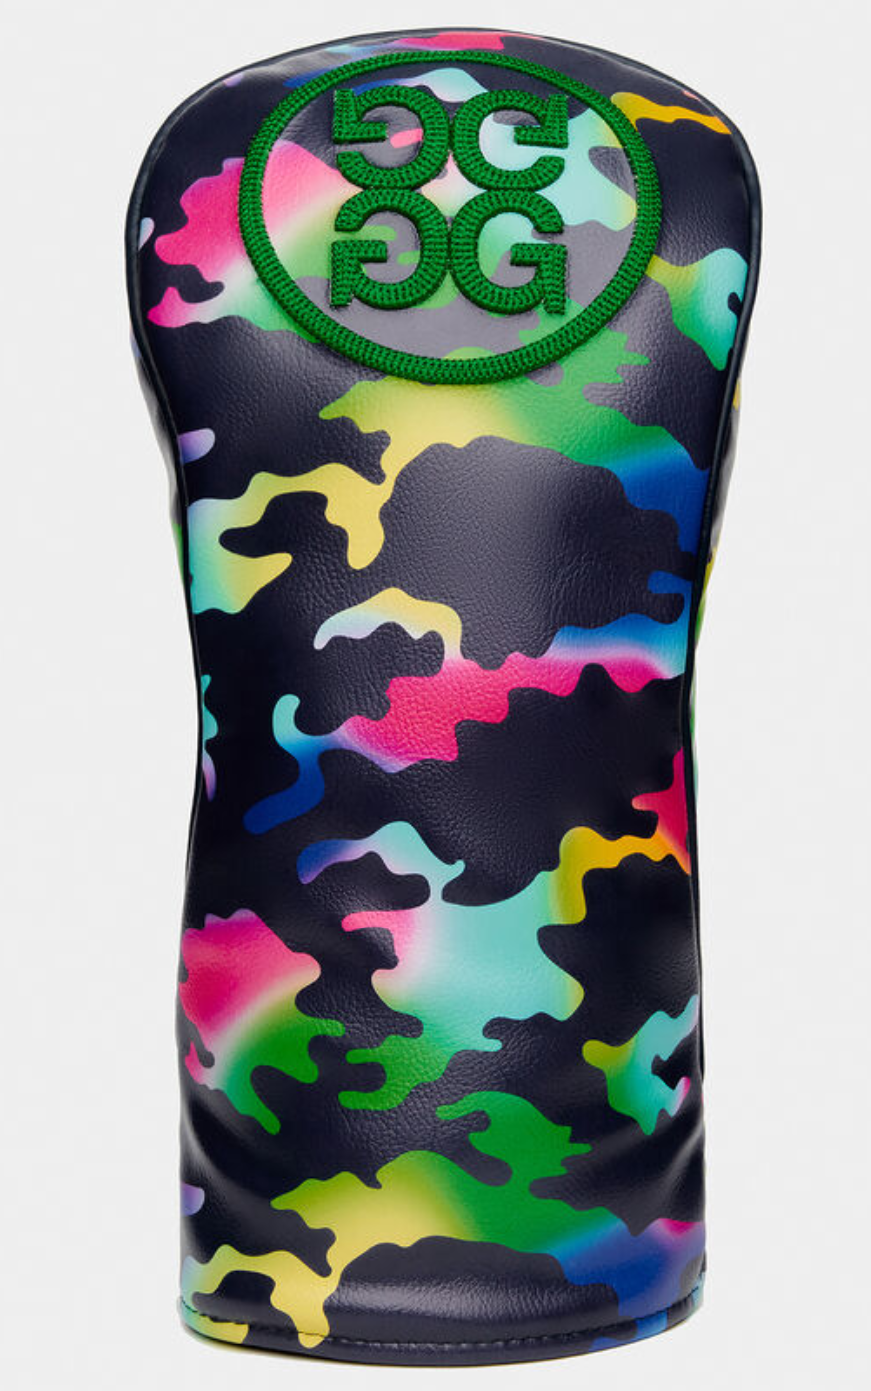 G/FORE CIRCLE G'S COLOUR BLEND CAMO DRIVER HEADCOVER